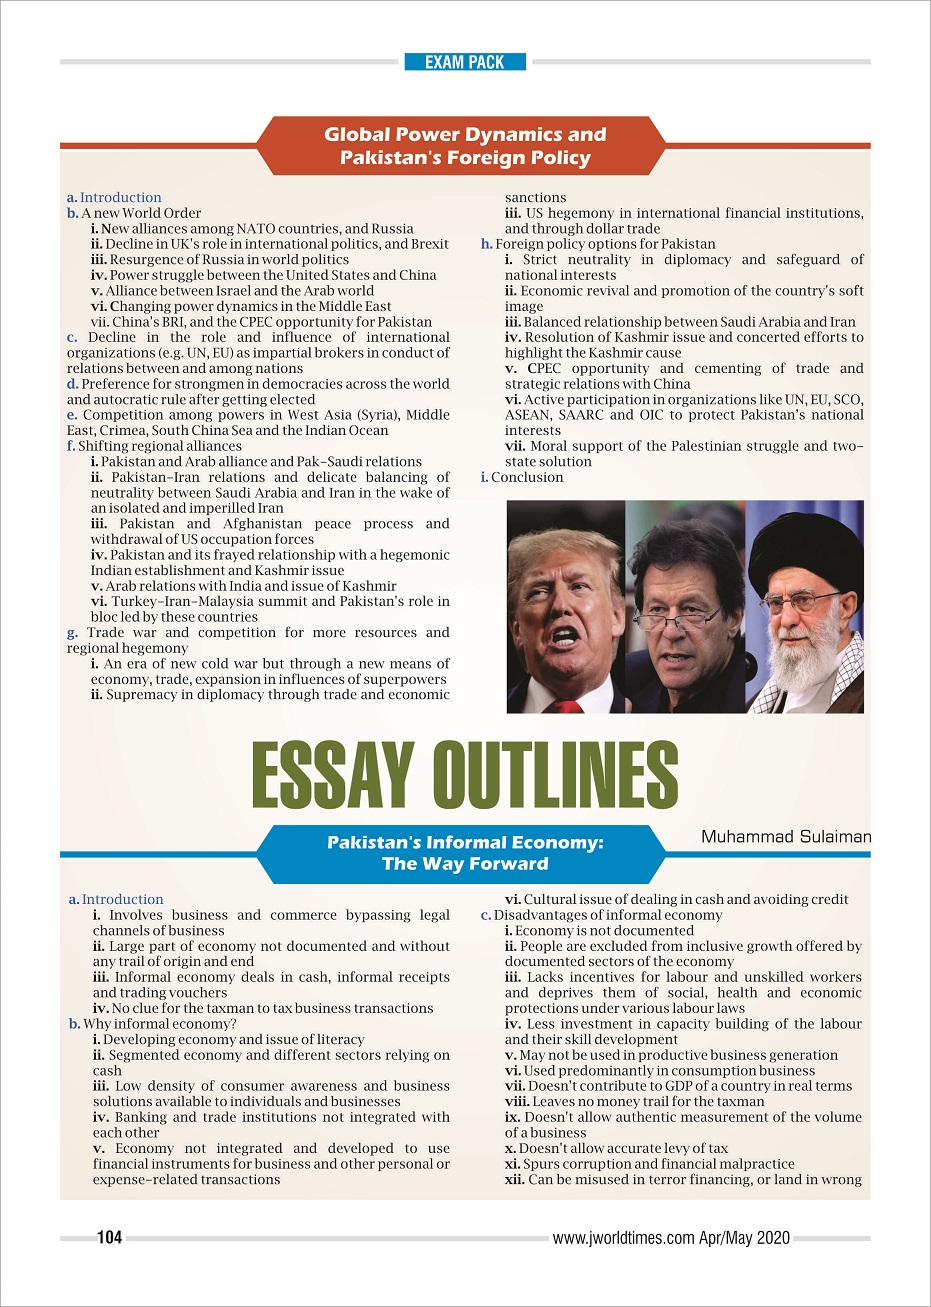 Essay Outlines.1